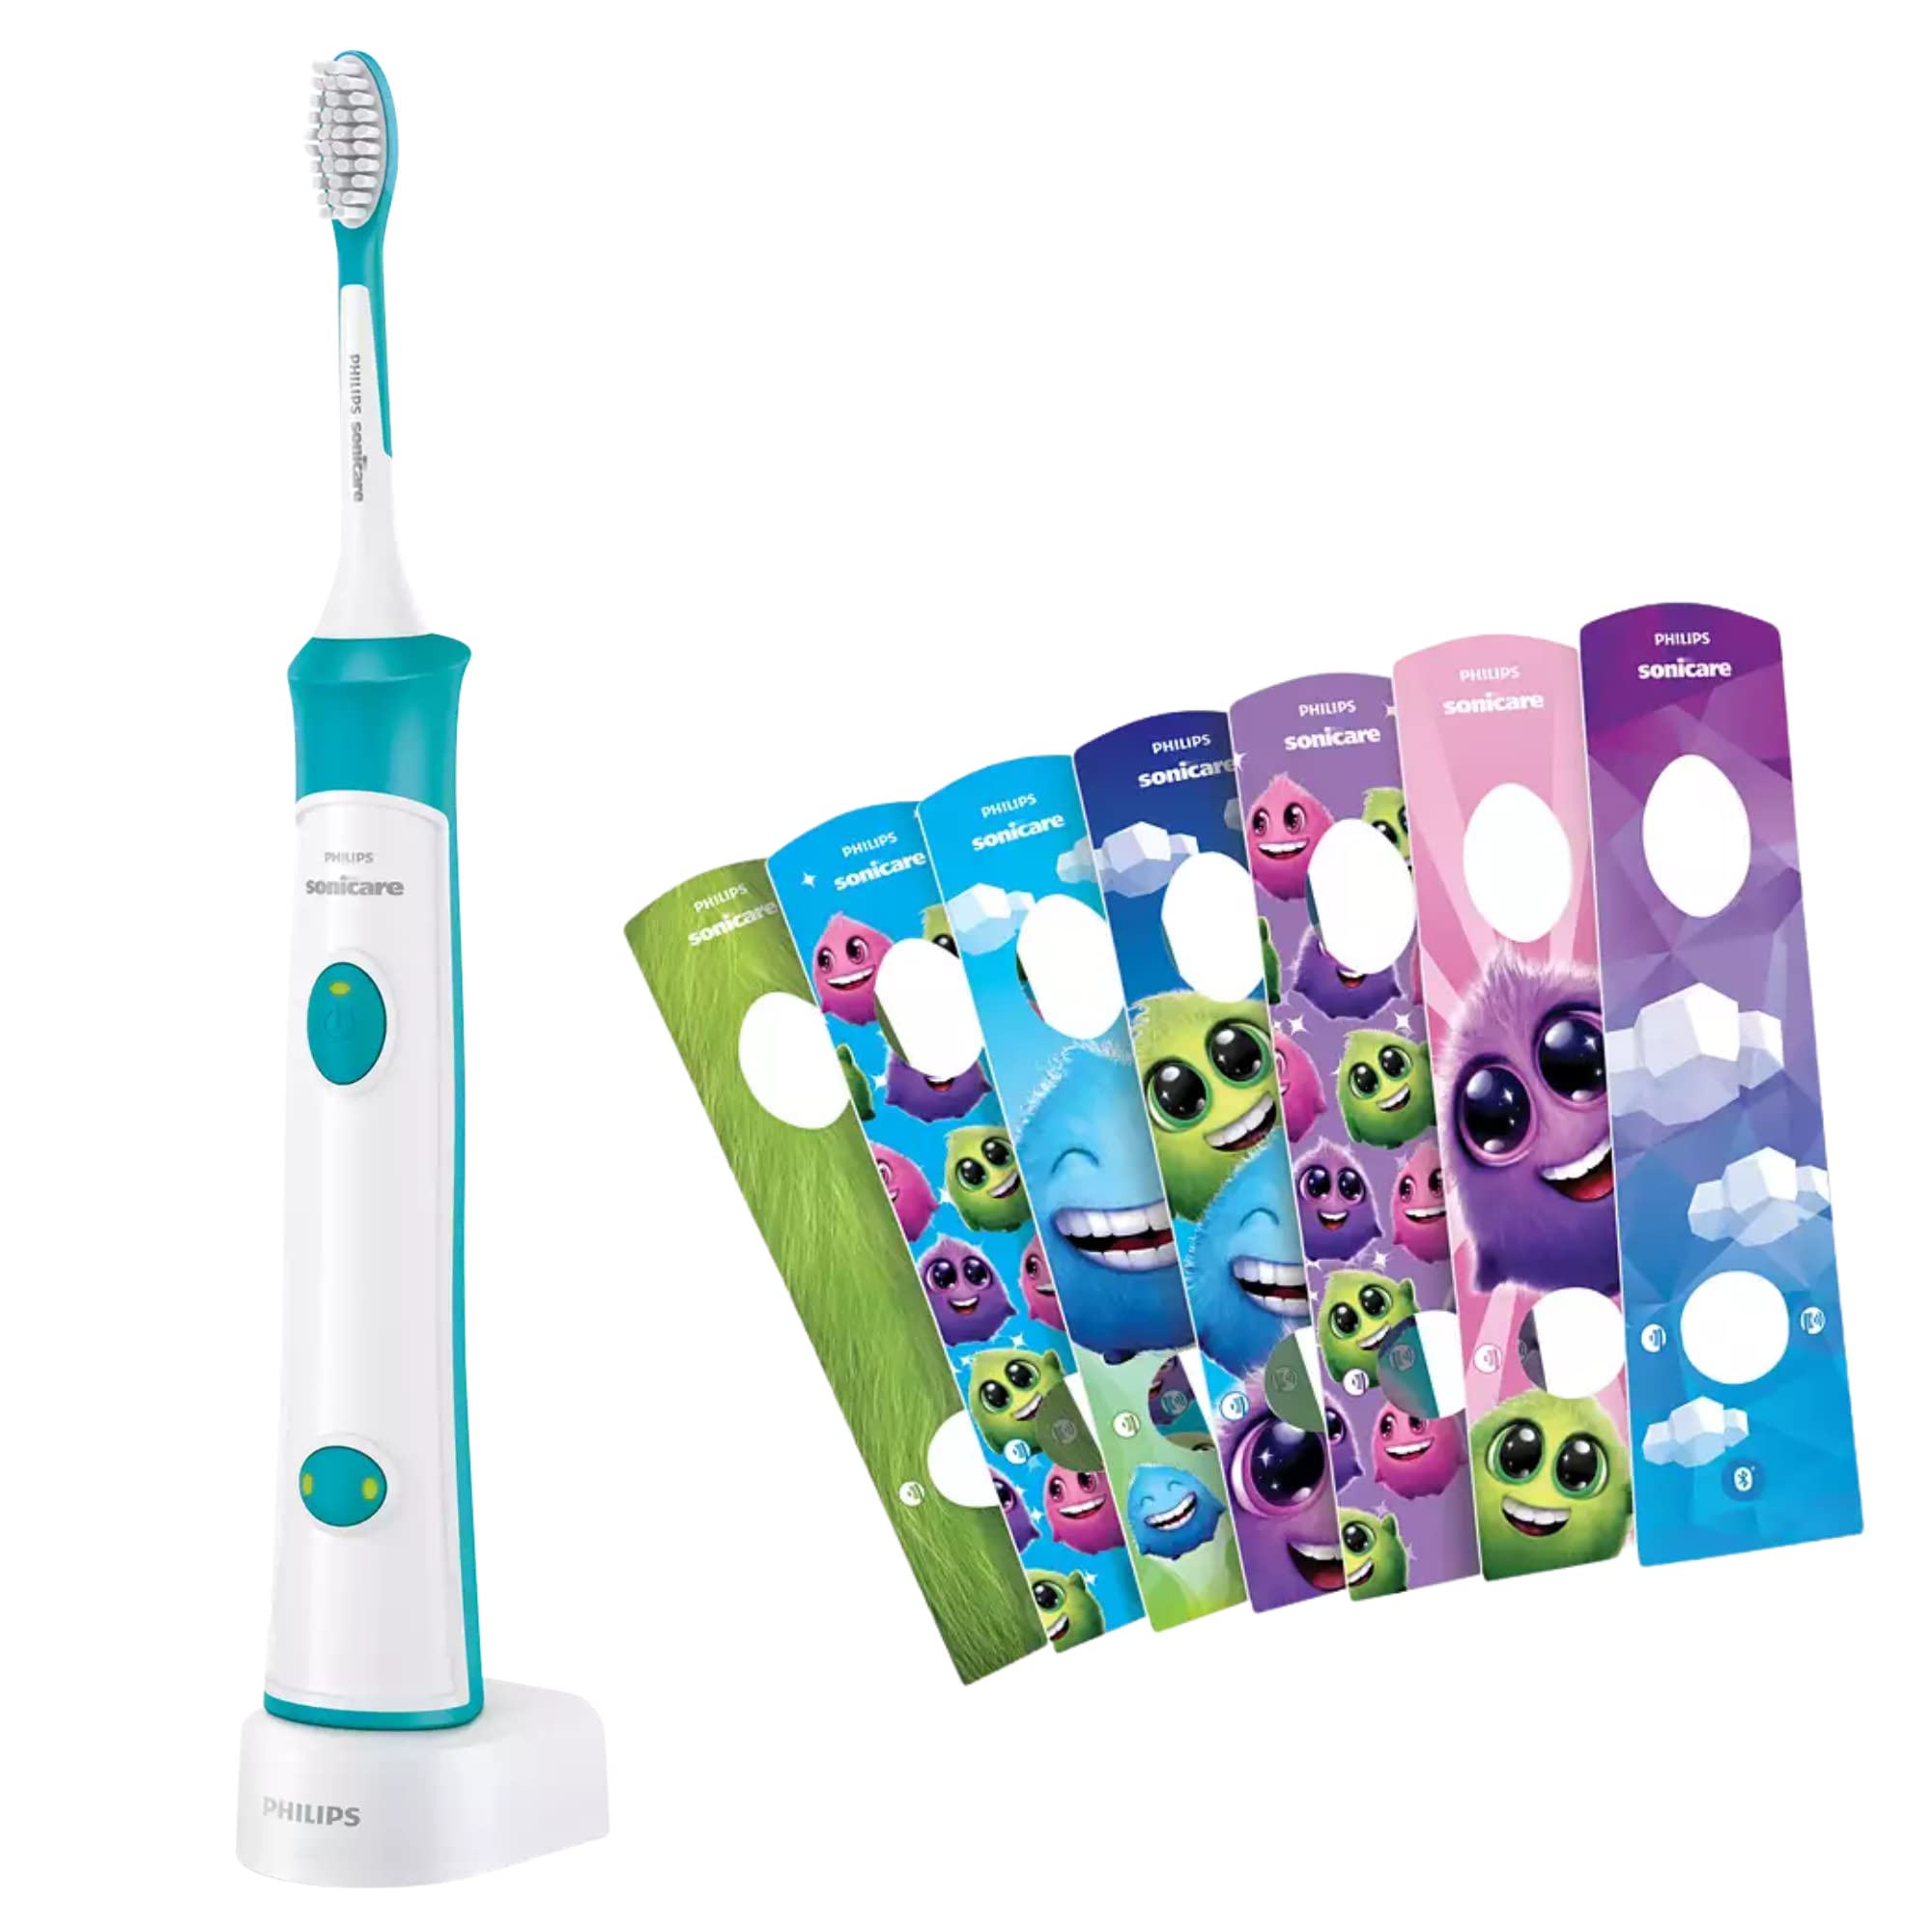 Philips Sonicare Kids Bluetooth Connected Rechargeable Electric Toothbrush, HX6321/05